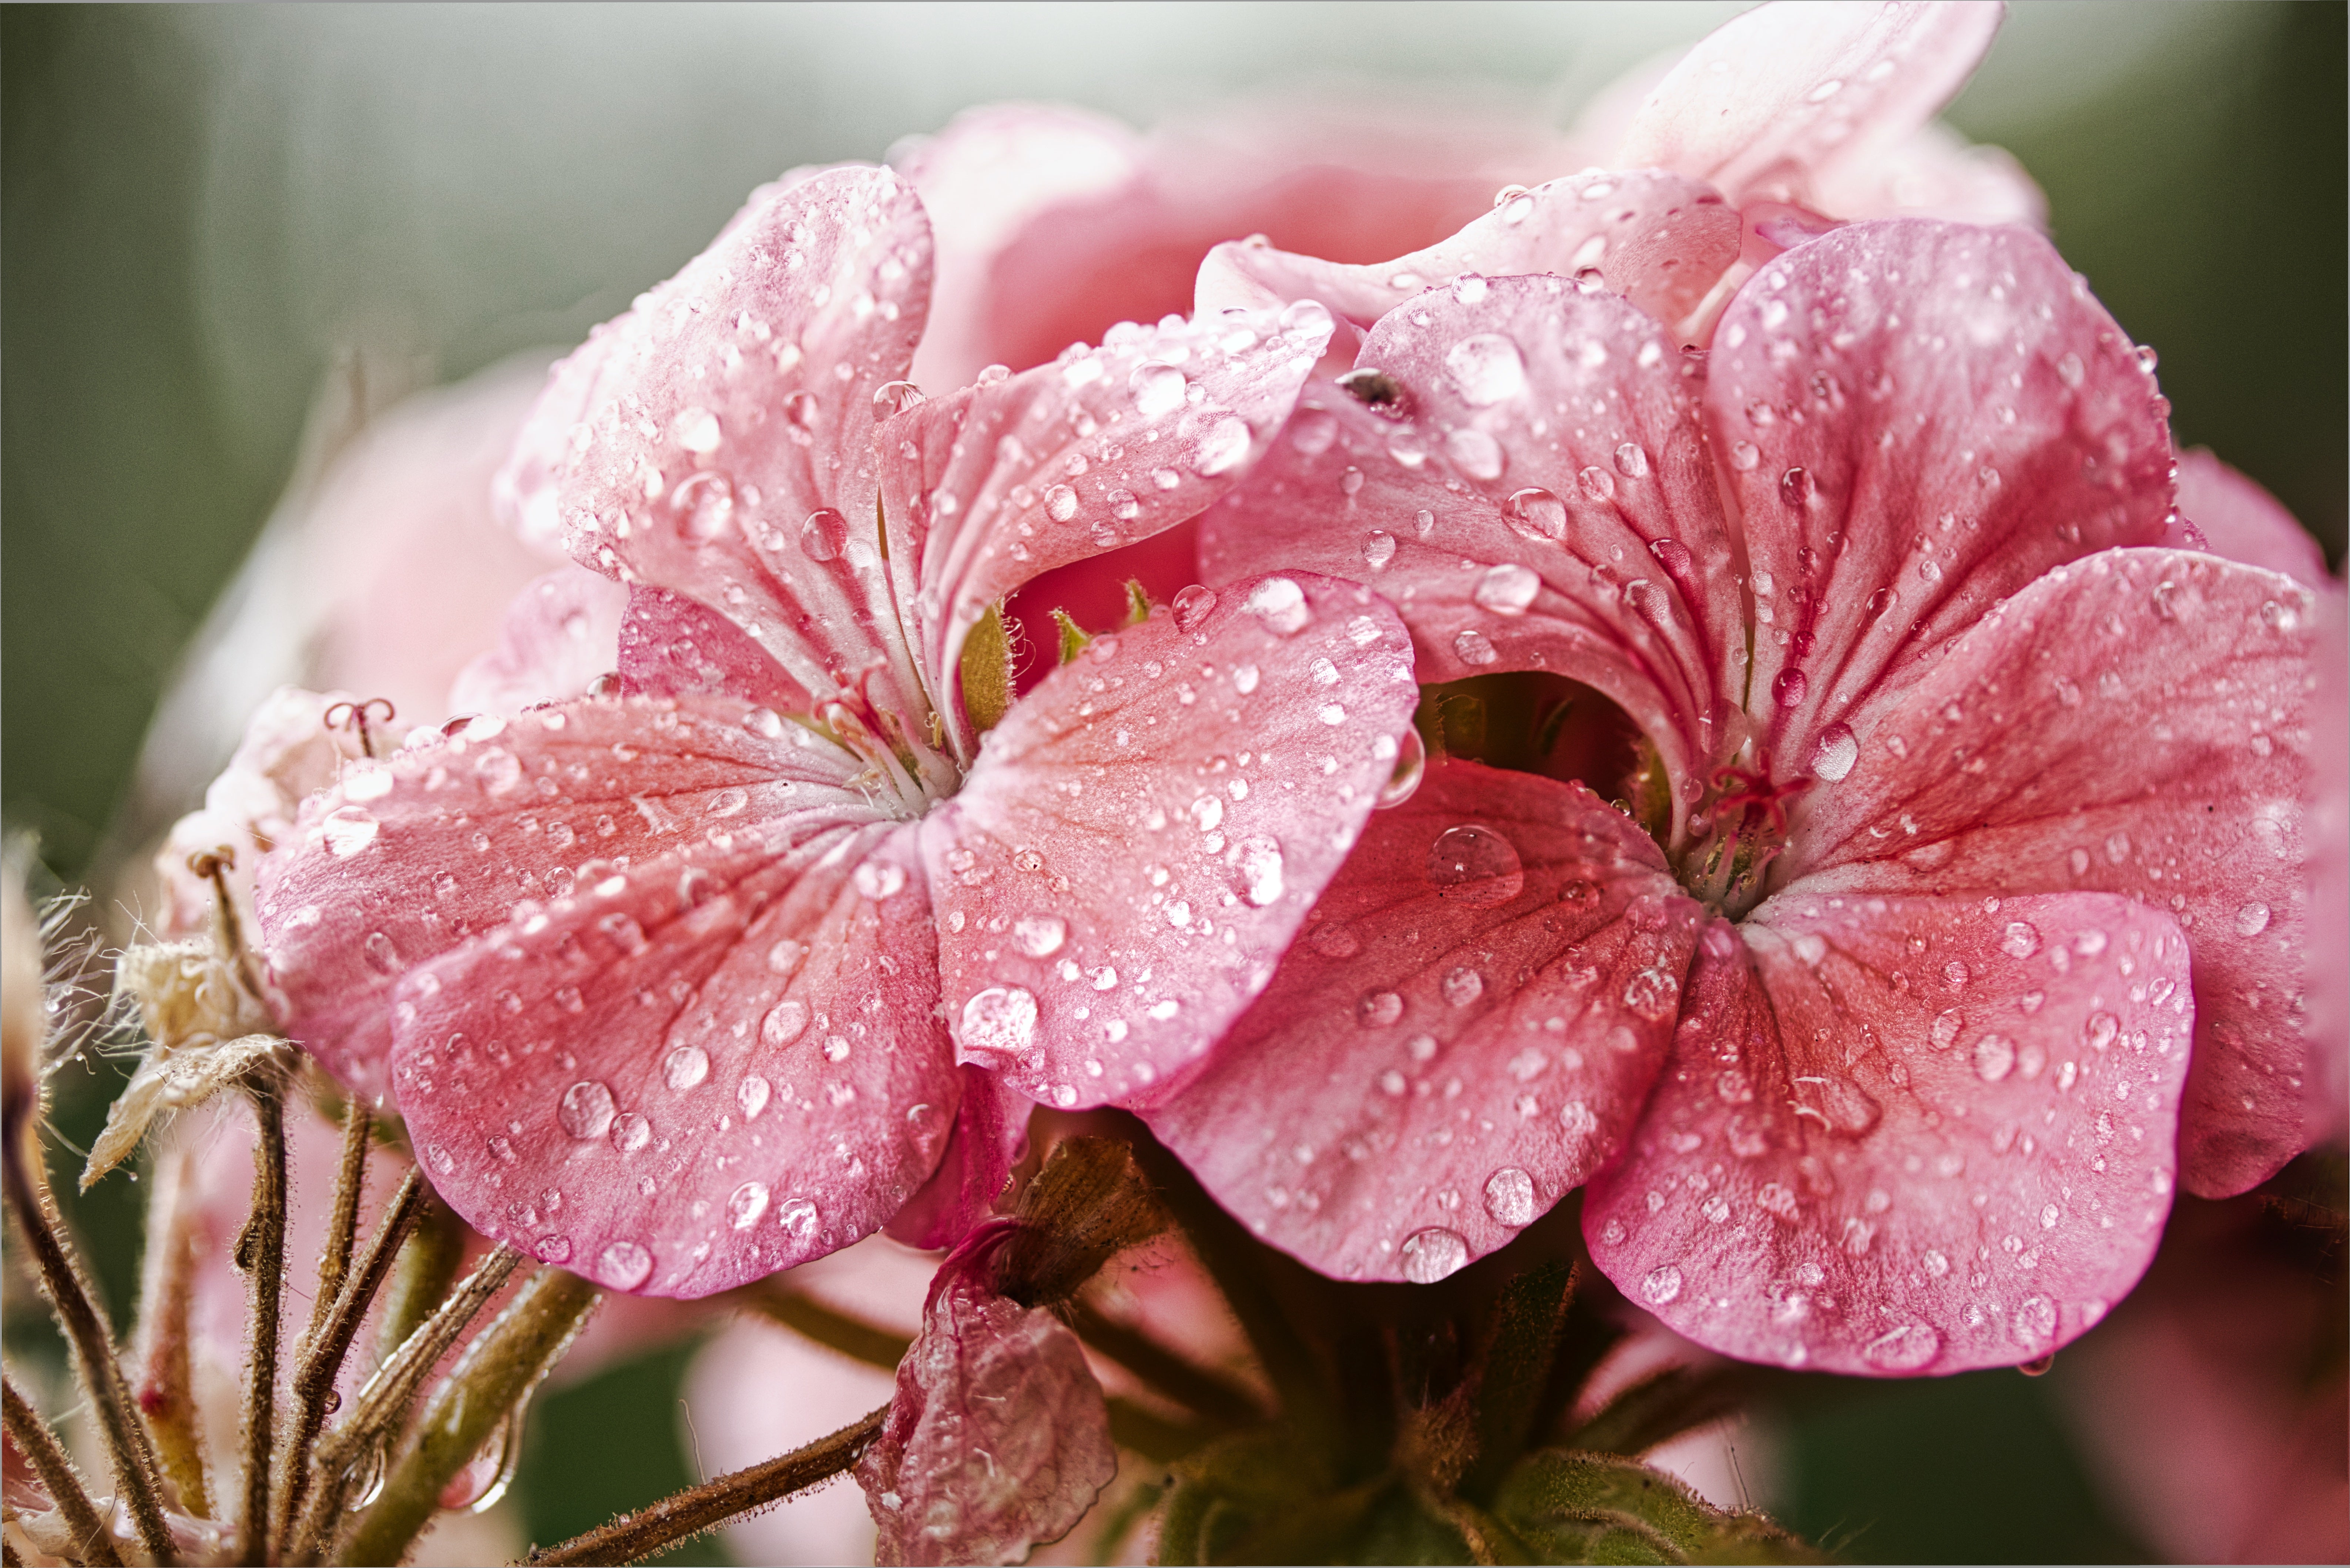 https://burst.shopifycdn.com/photos/close-up-of-pink-flowers-with-fresh-water-drops.jpg?exif=0&iptc=0